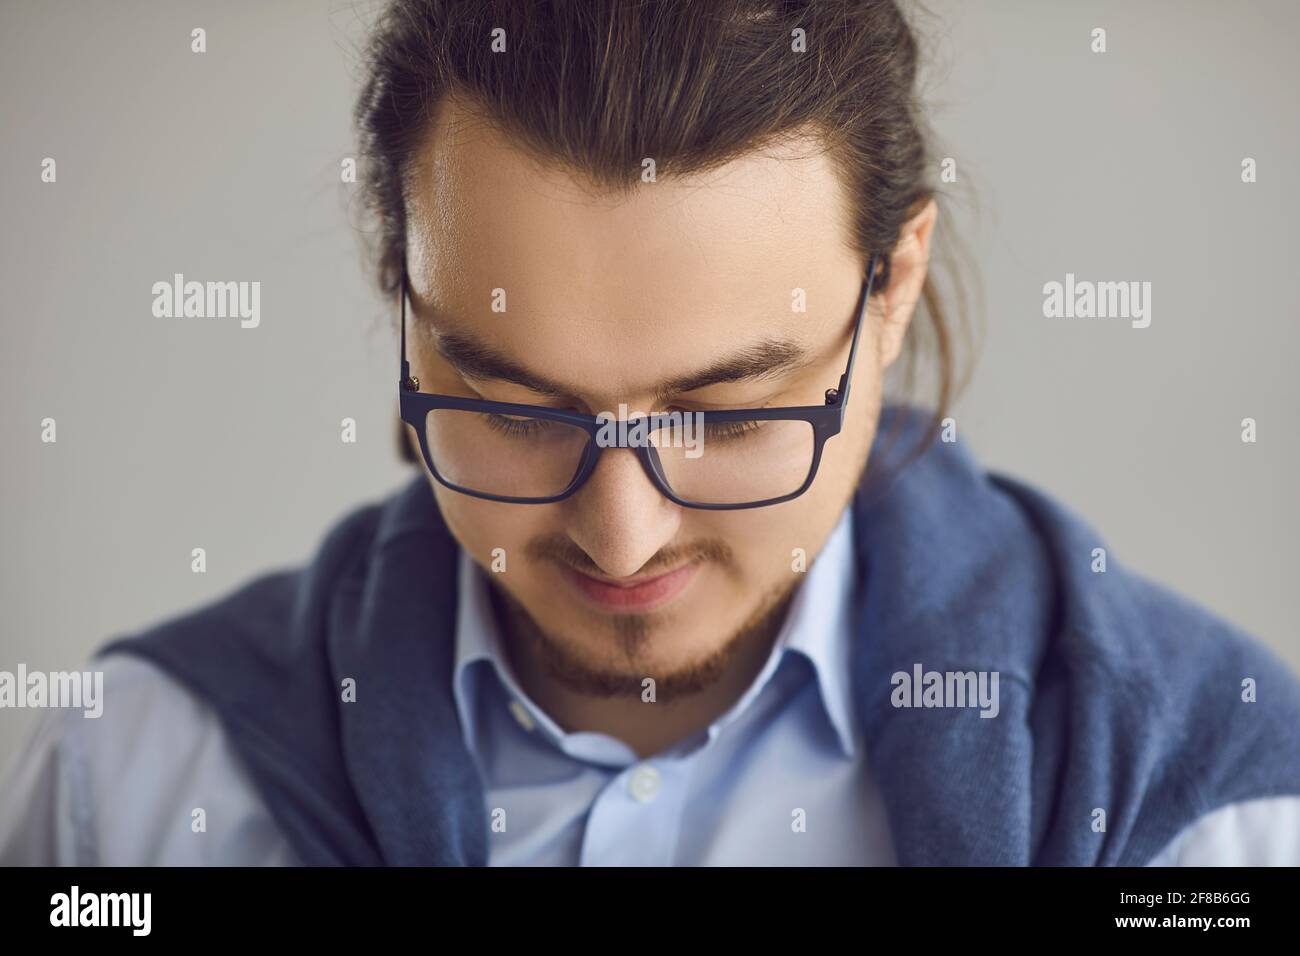 Closeup portrait of smart young man in glasses and shirt on gray studio background Stock Photo